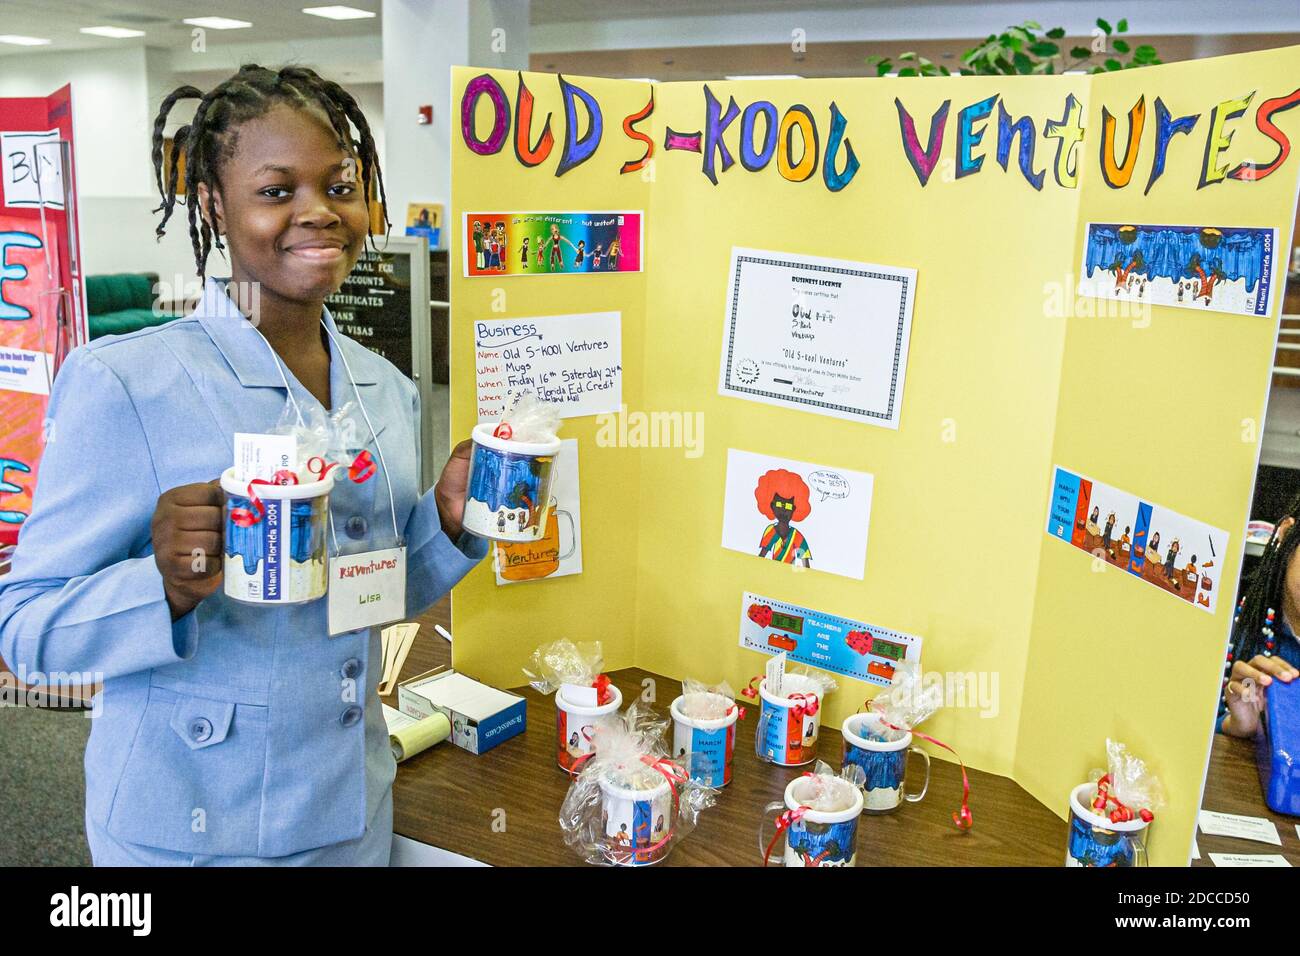 Miami Florida,KidVentures Expo learning entrepreneurs,student students presenting business ideas Black African girl, Stock Photo